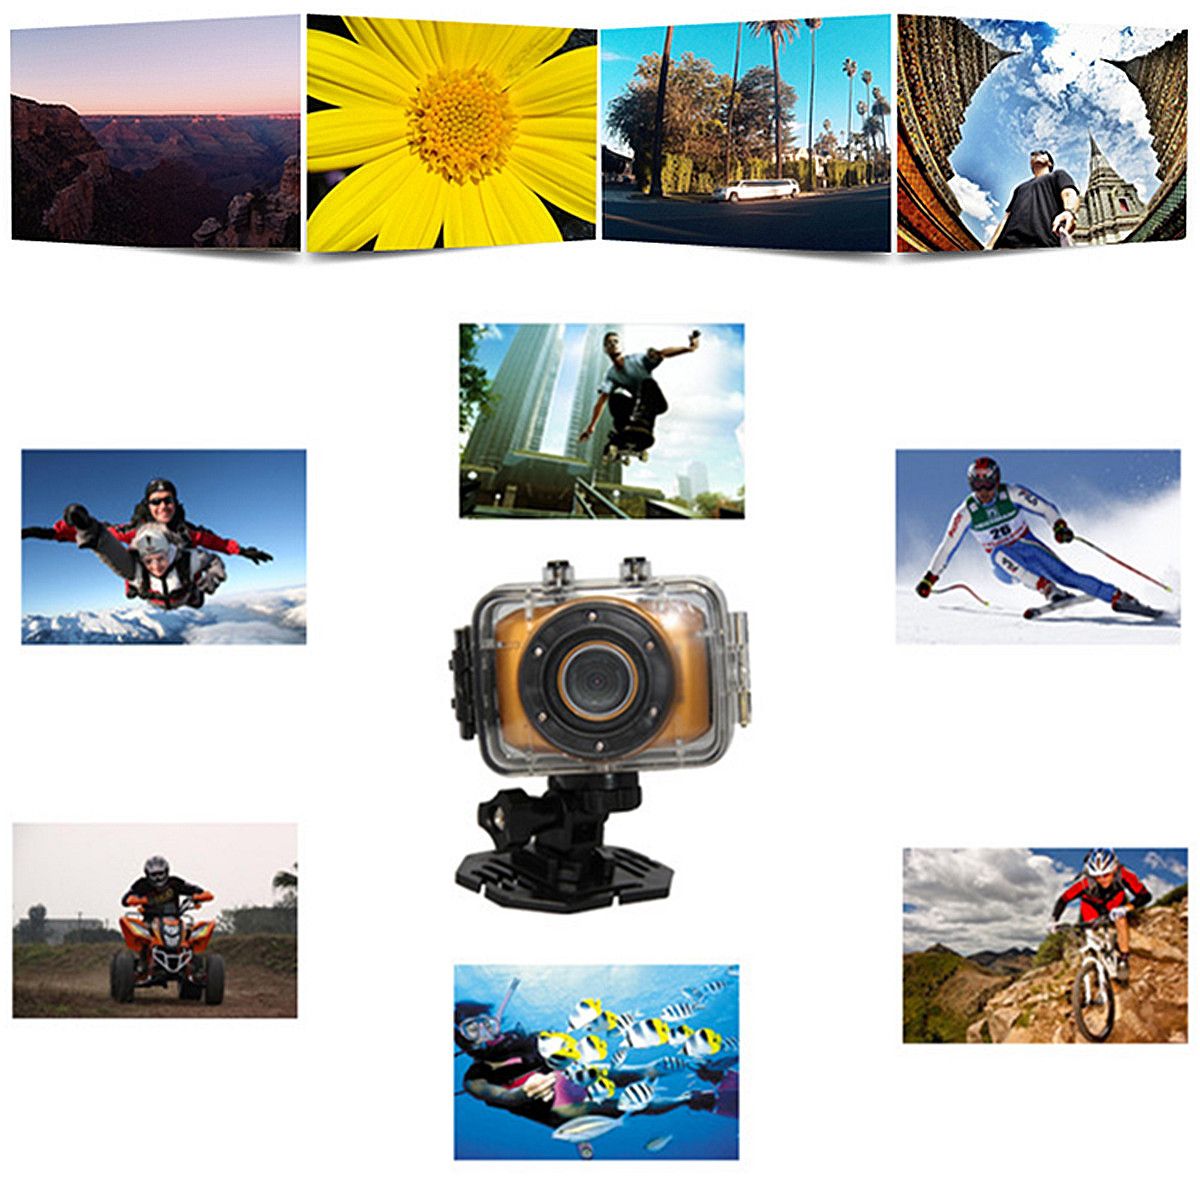 2-Inch-720P-HD-Touch-Screen-Portable-Waterproof-Mini-Action-Outdoor-Sport-Camera-DV-Camcorder-1336787